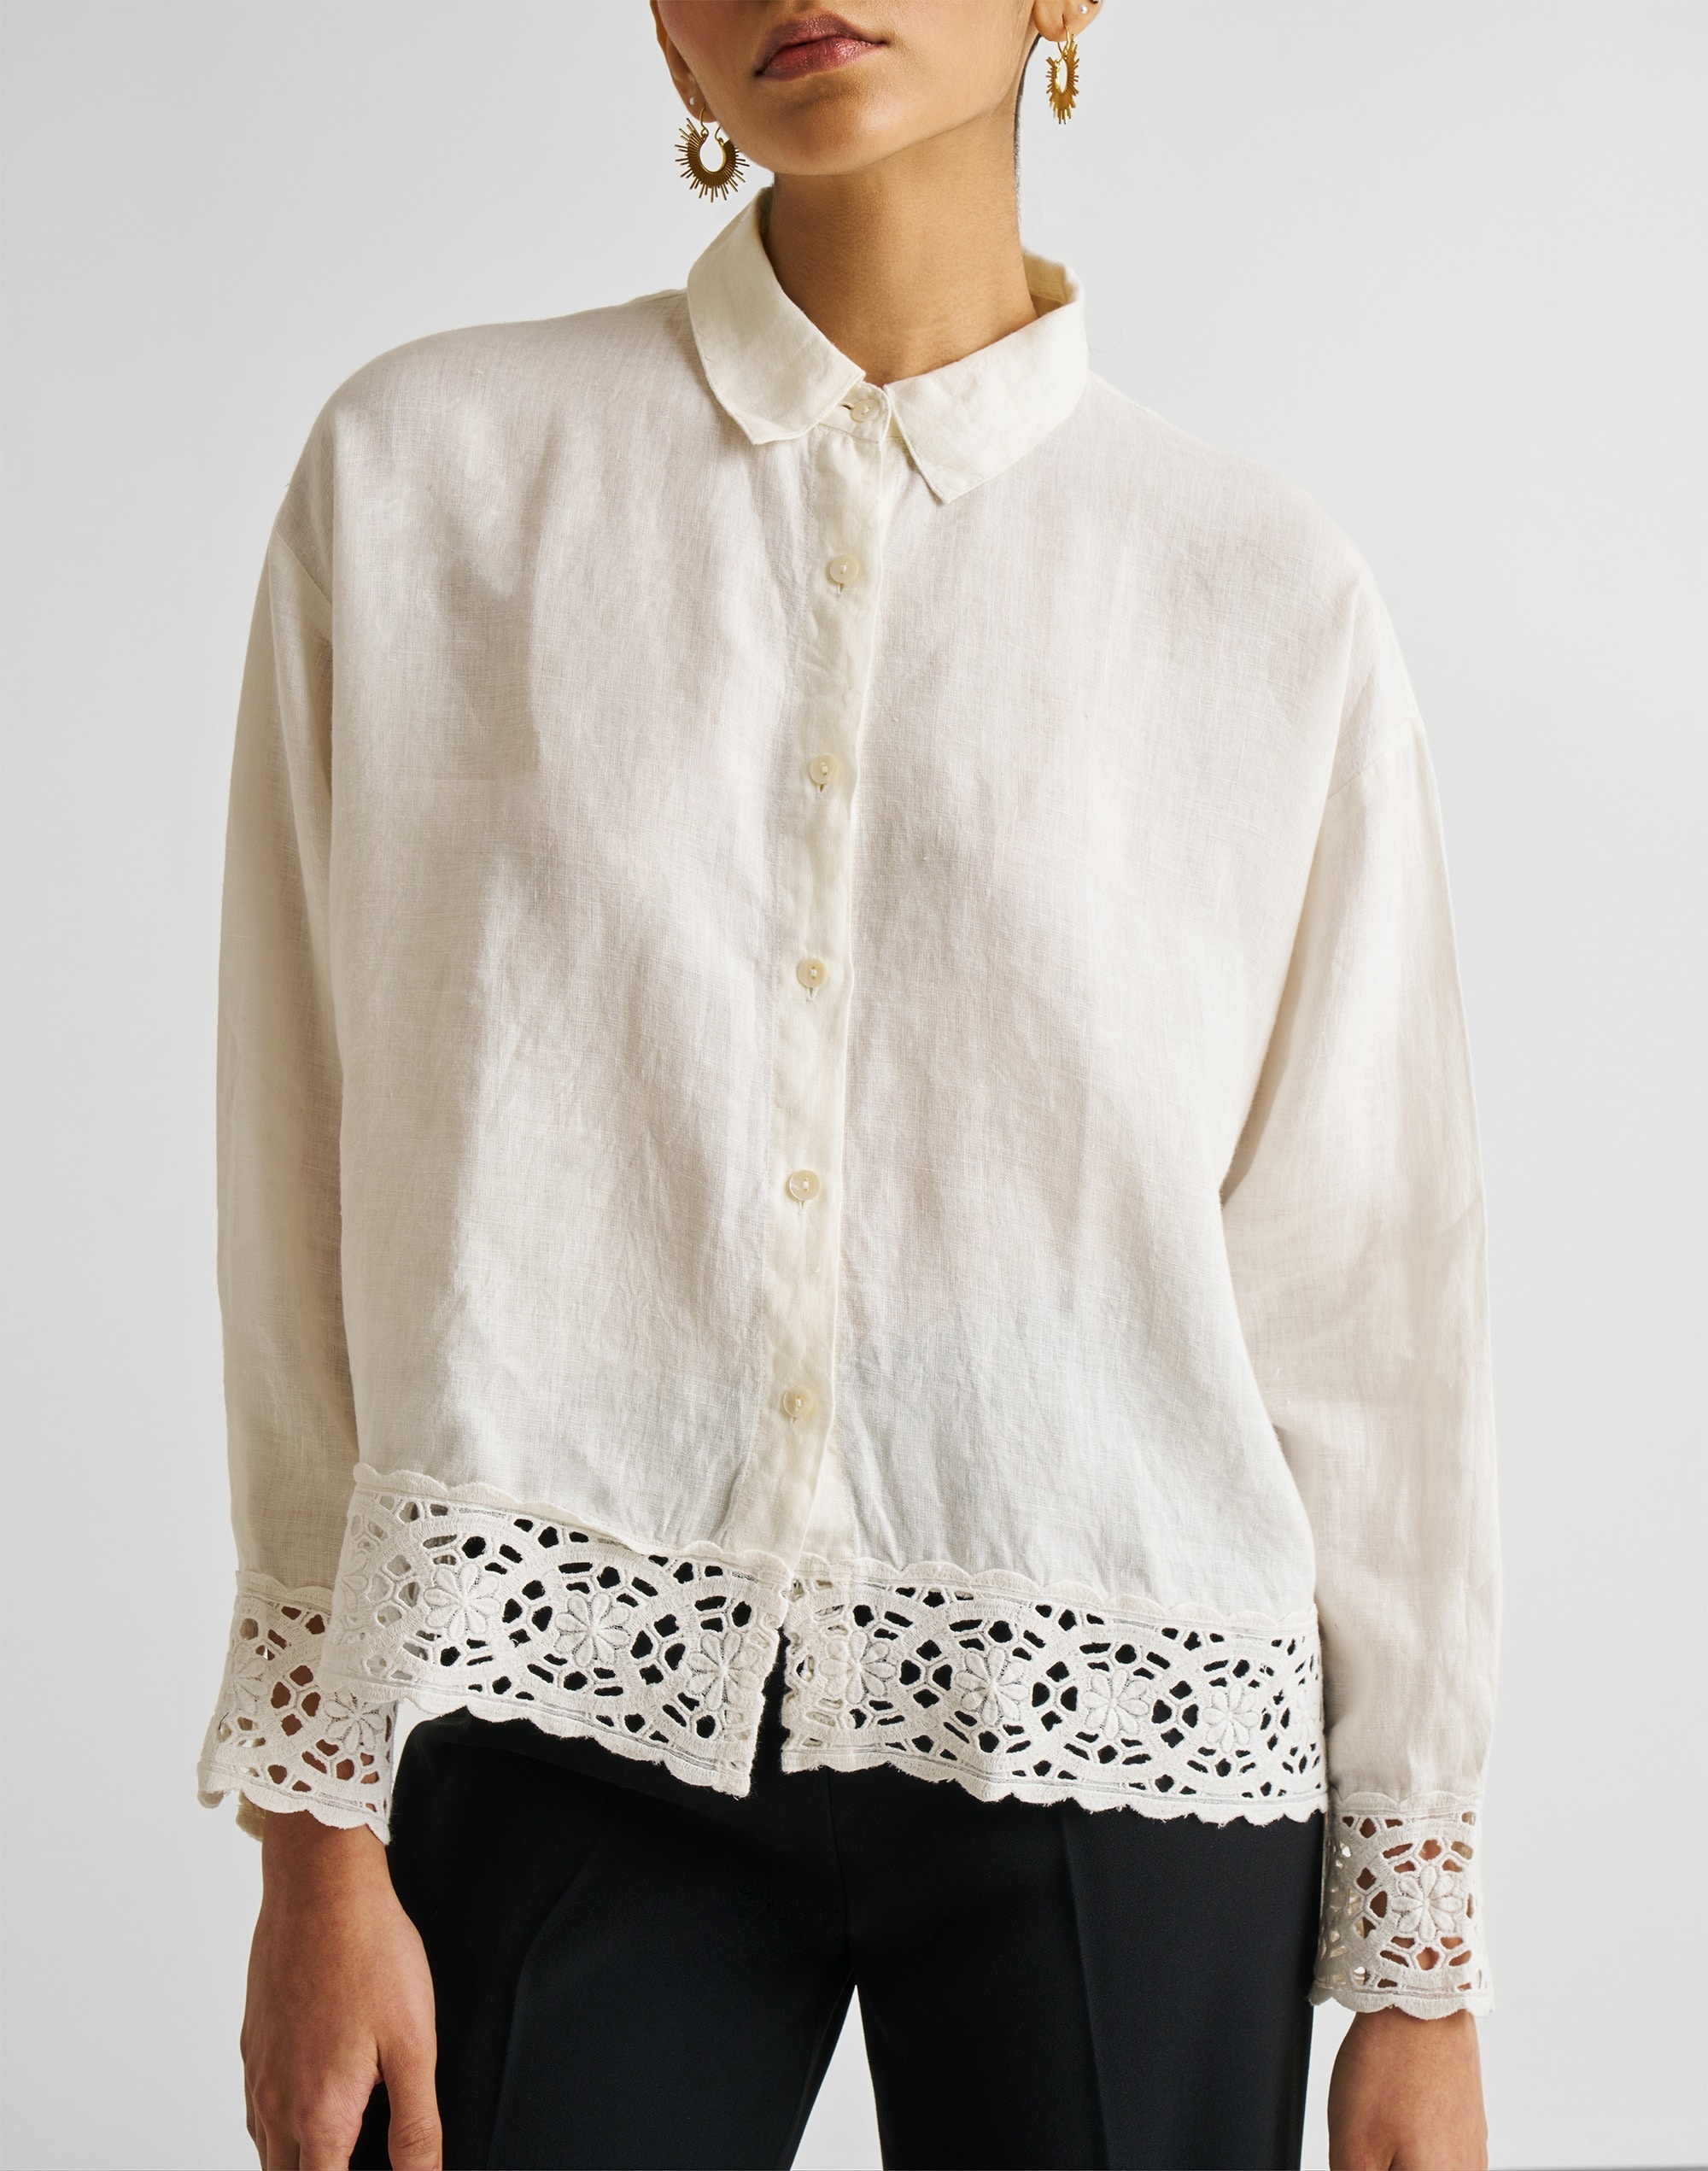 Reistor® Button-down with Embroidered Lace Shirt